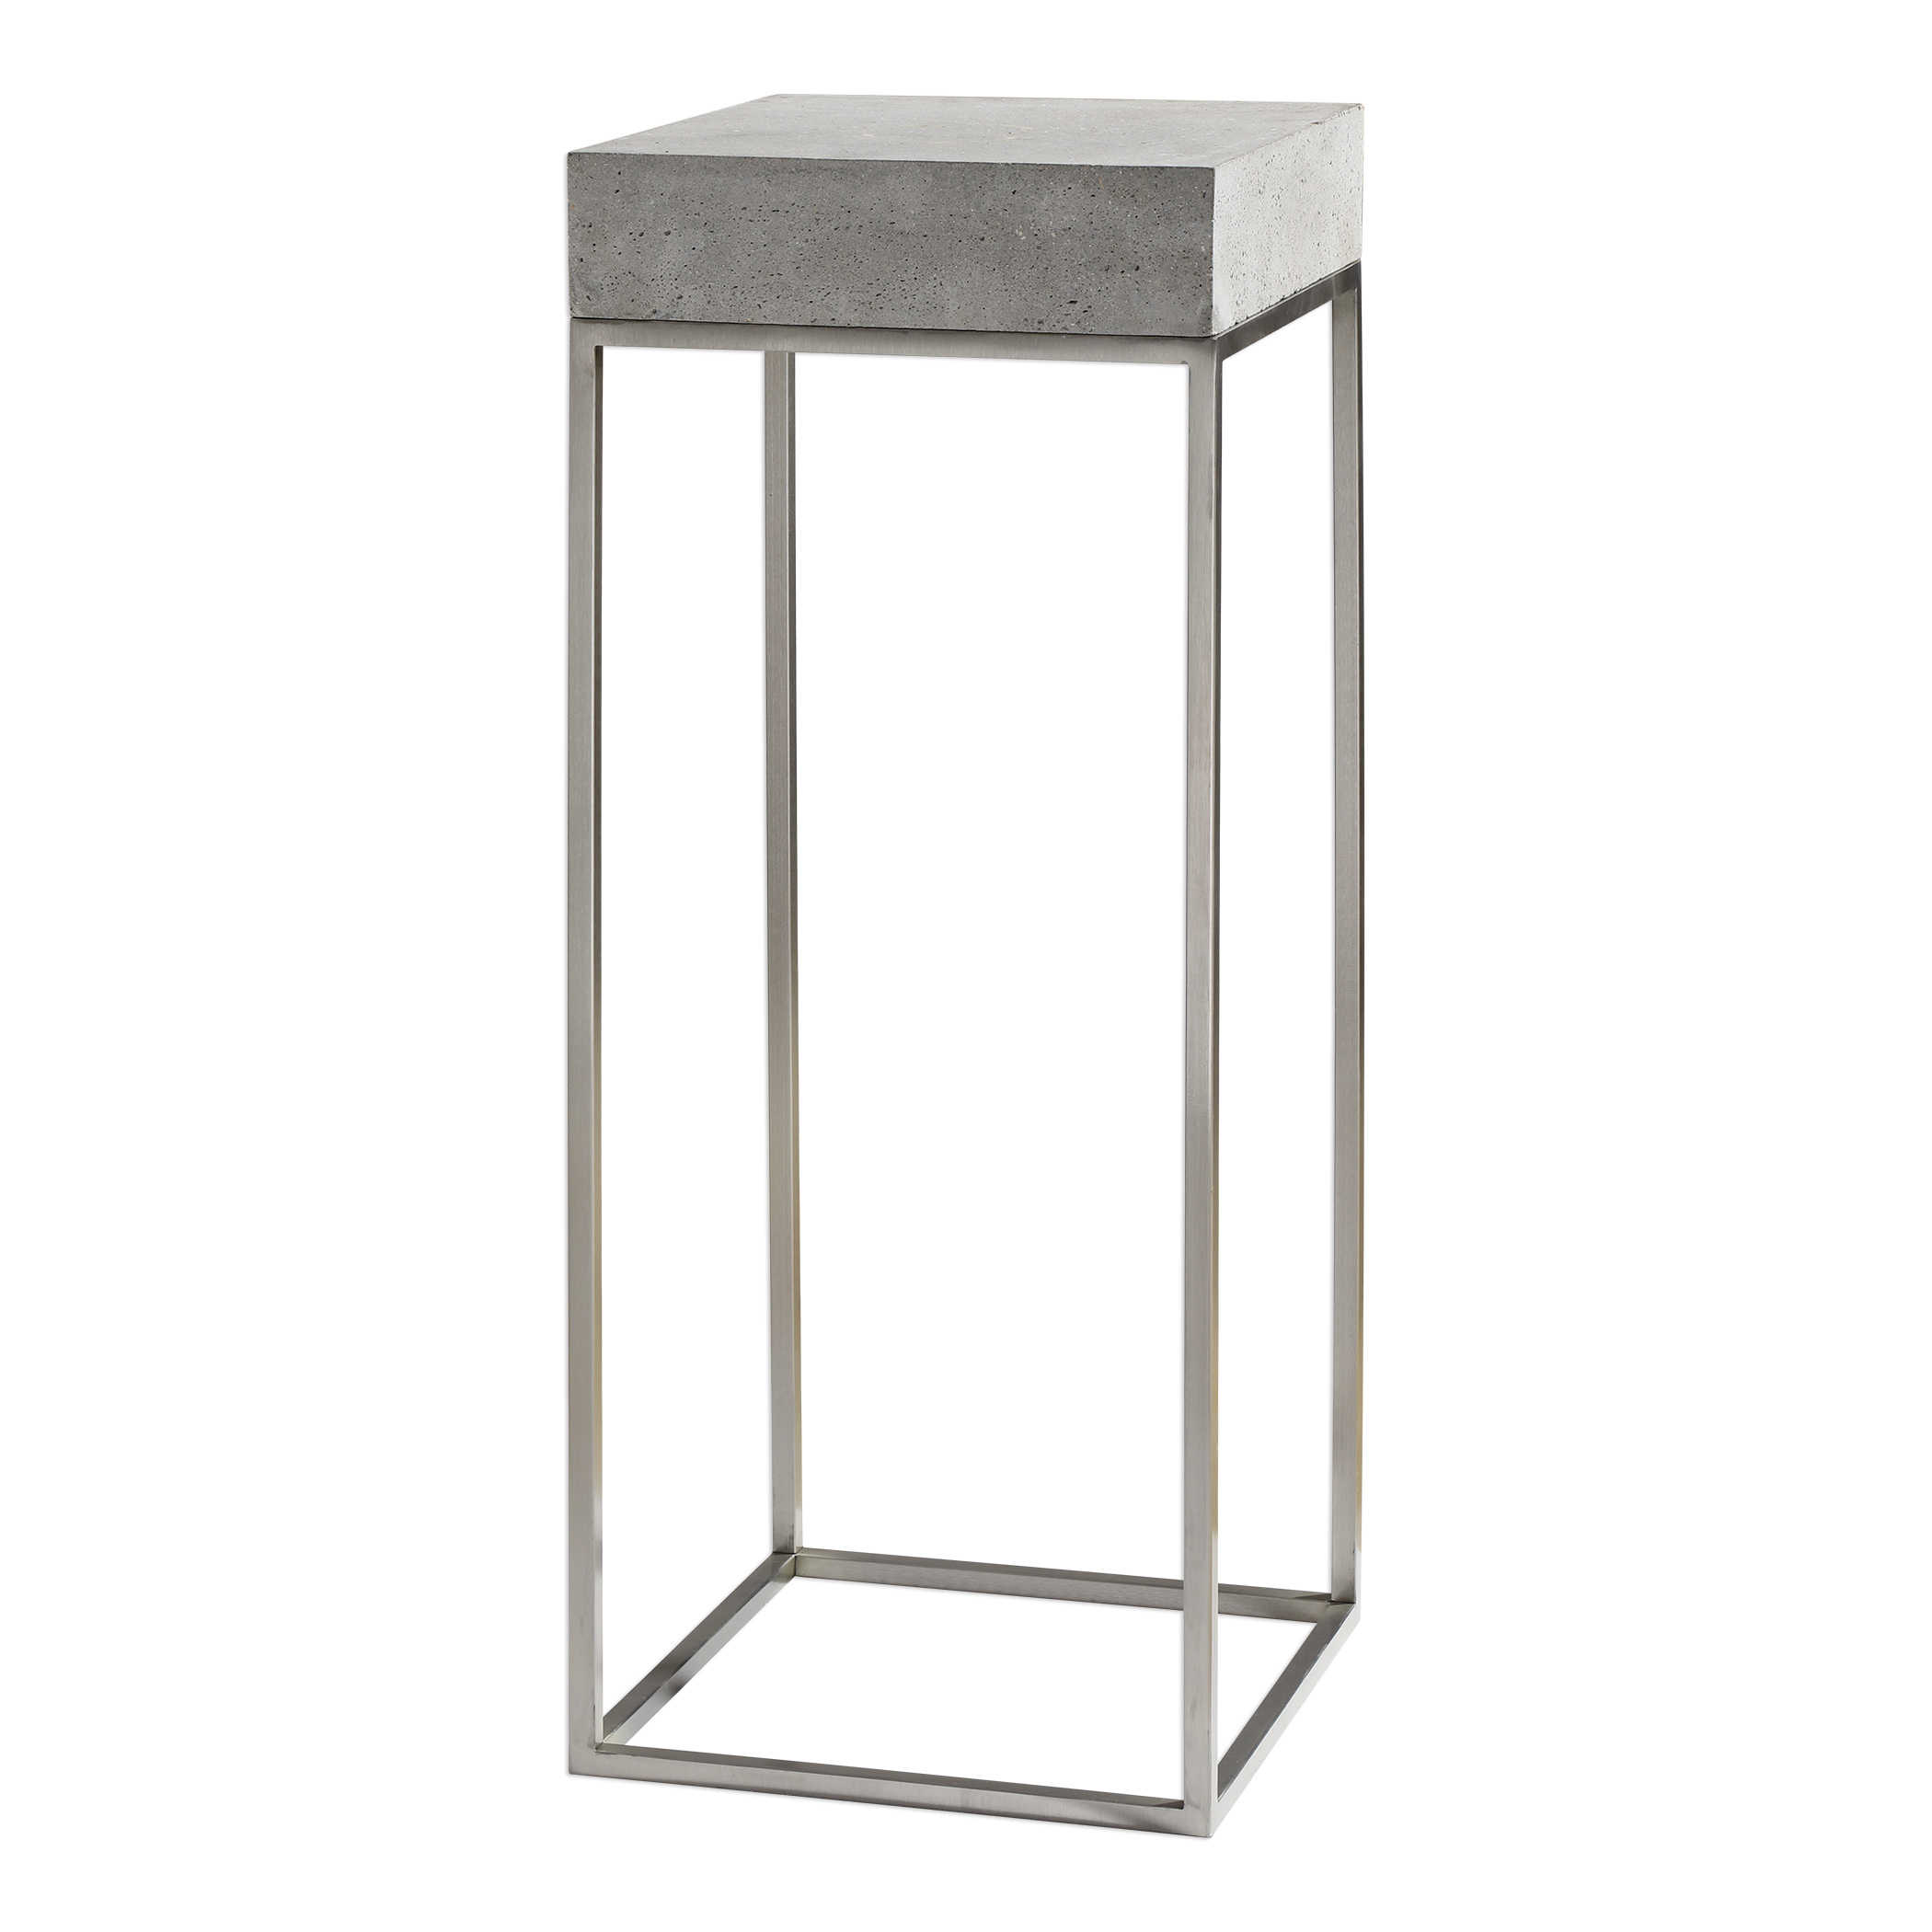 Concrete and Steel Plant Stand-$495.00